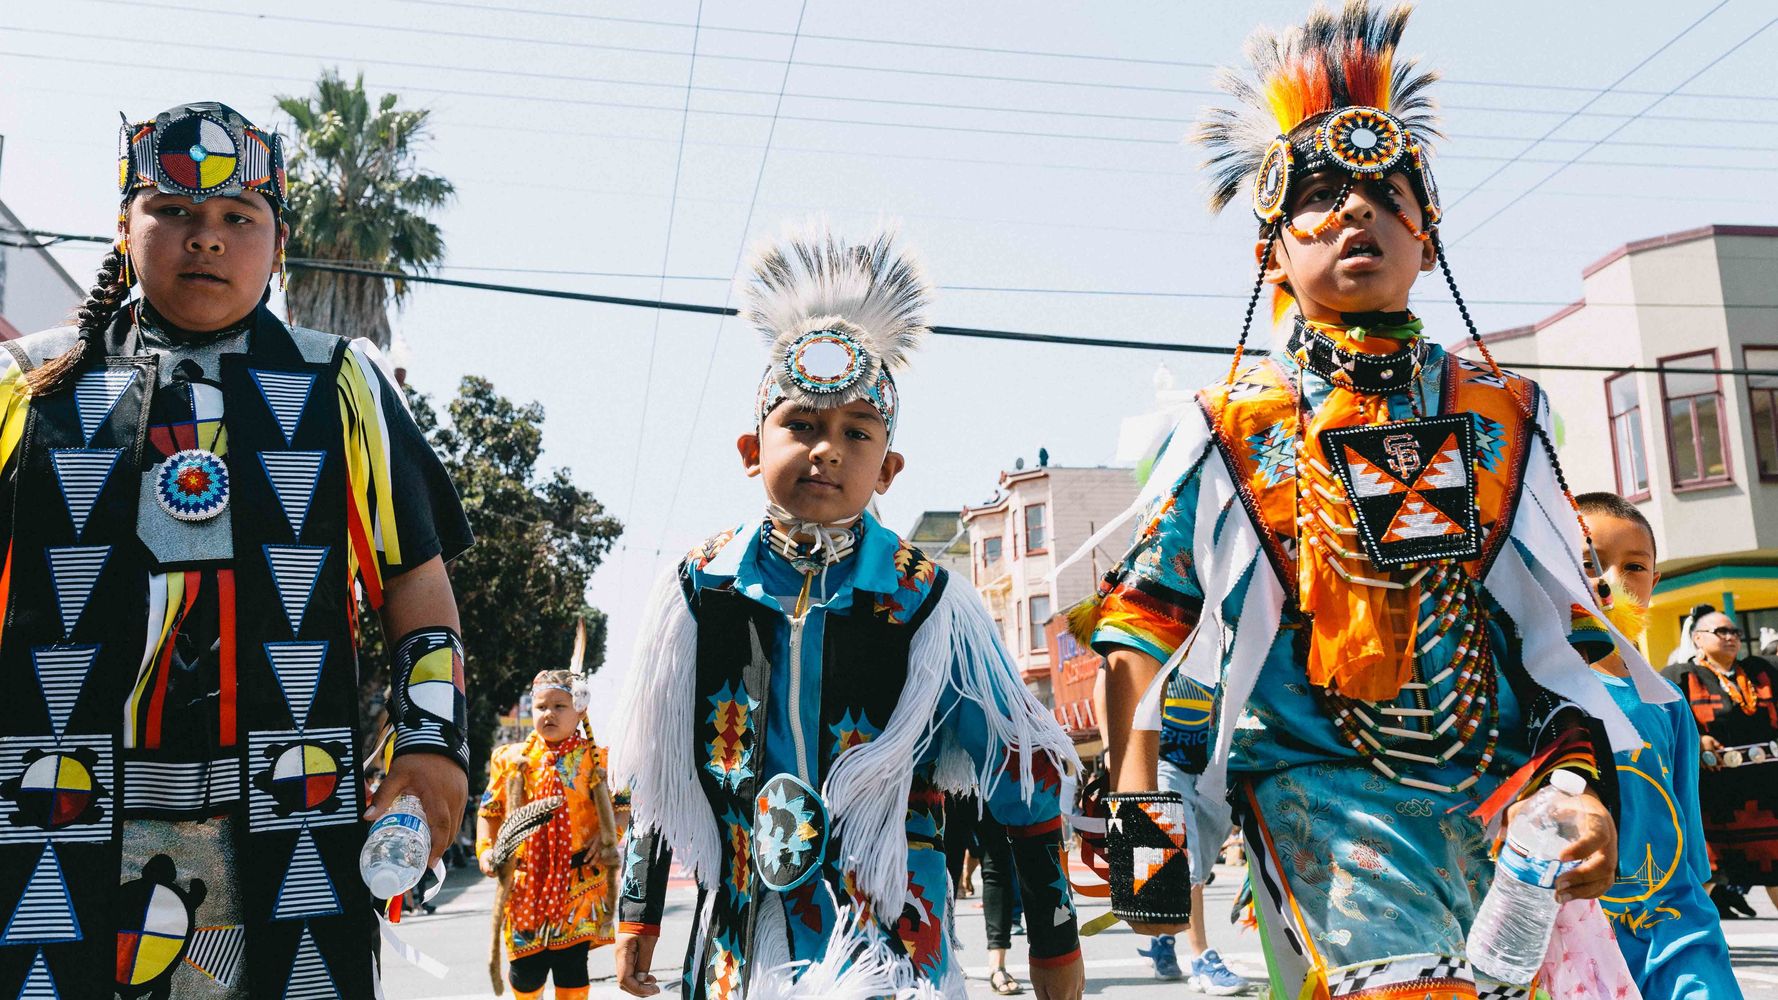 California's largest outdoor multicultural festival Carnaval San